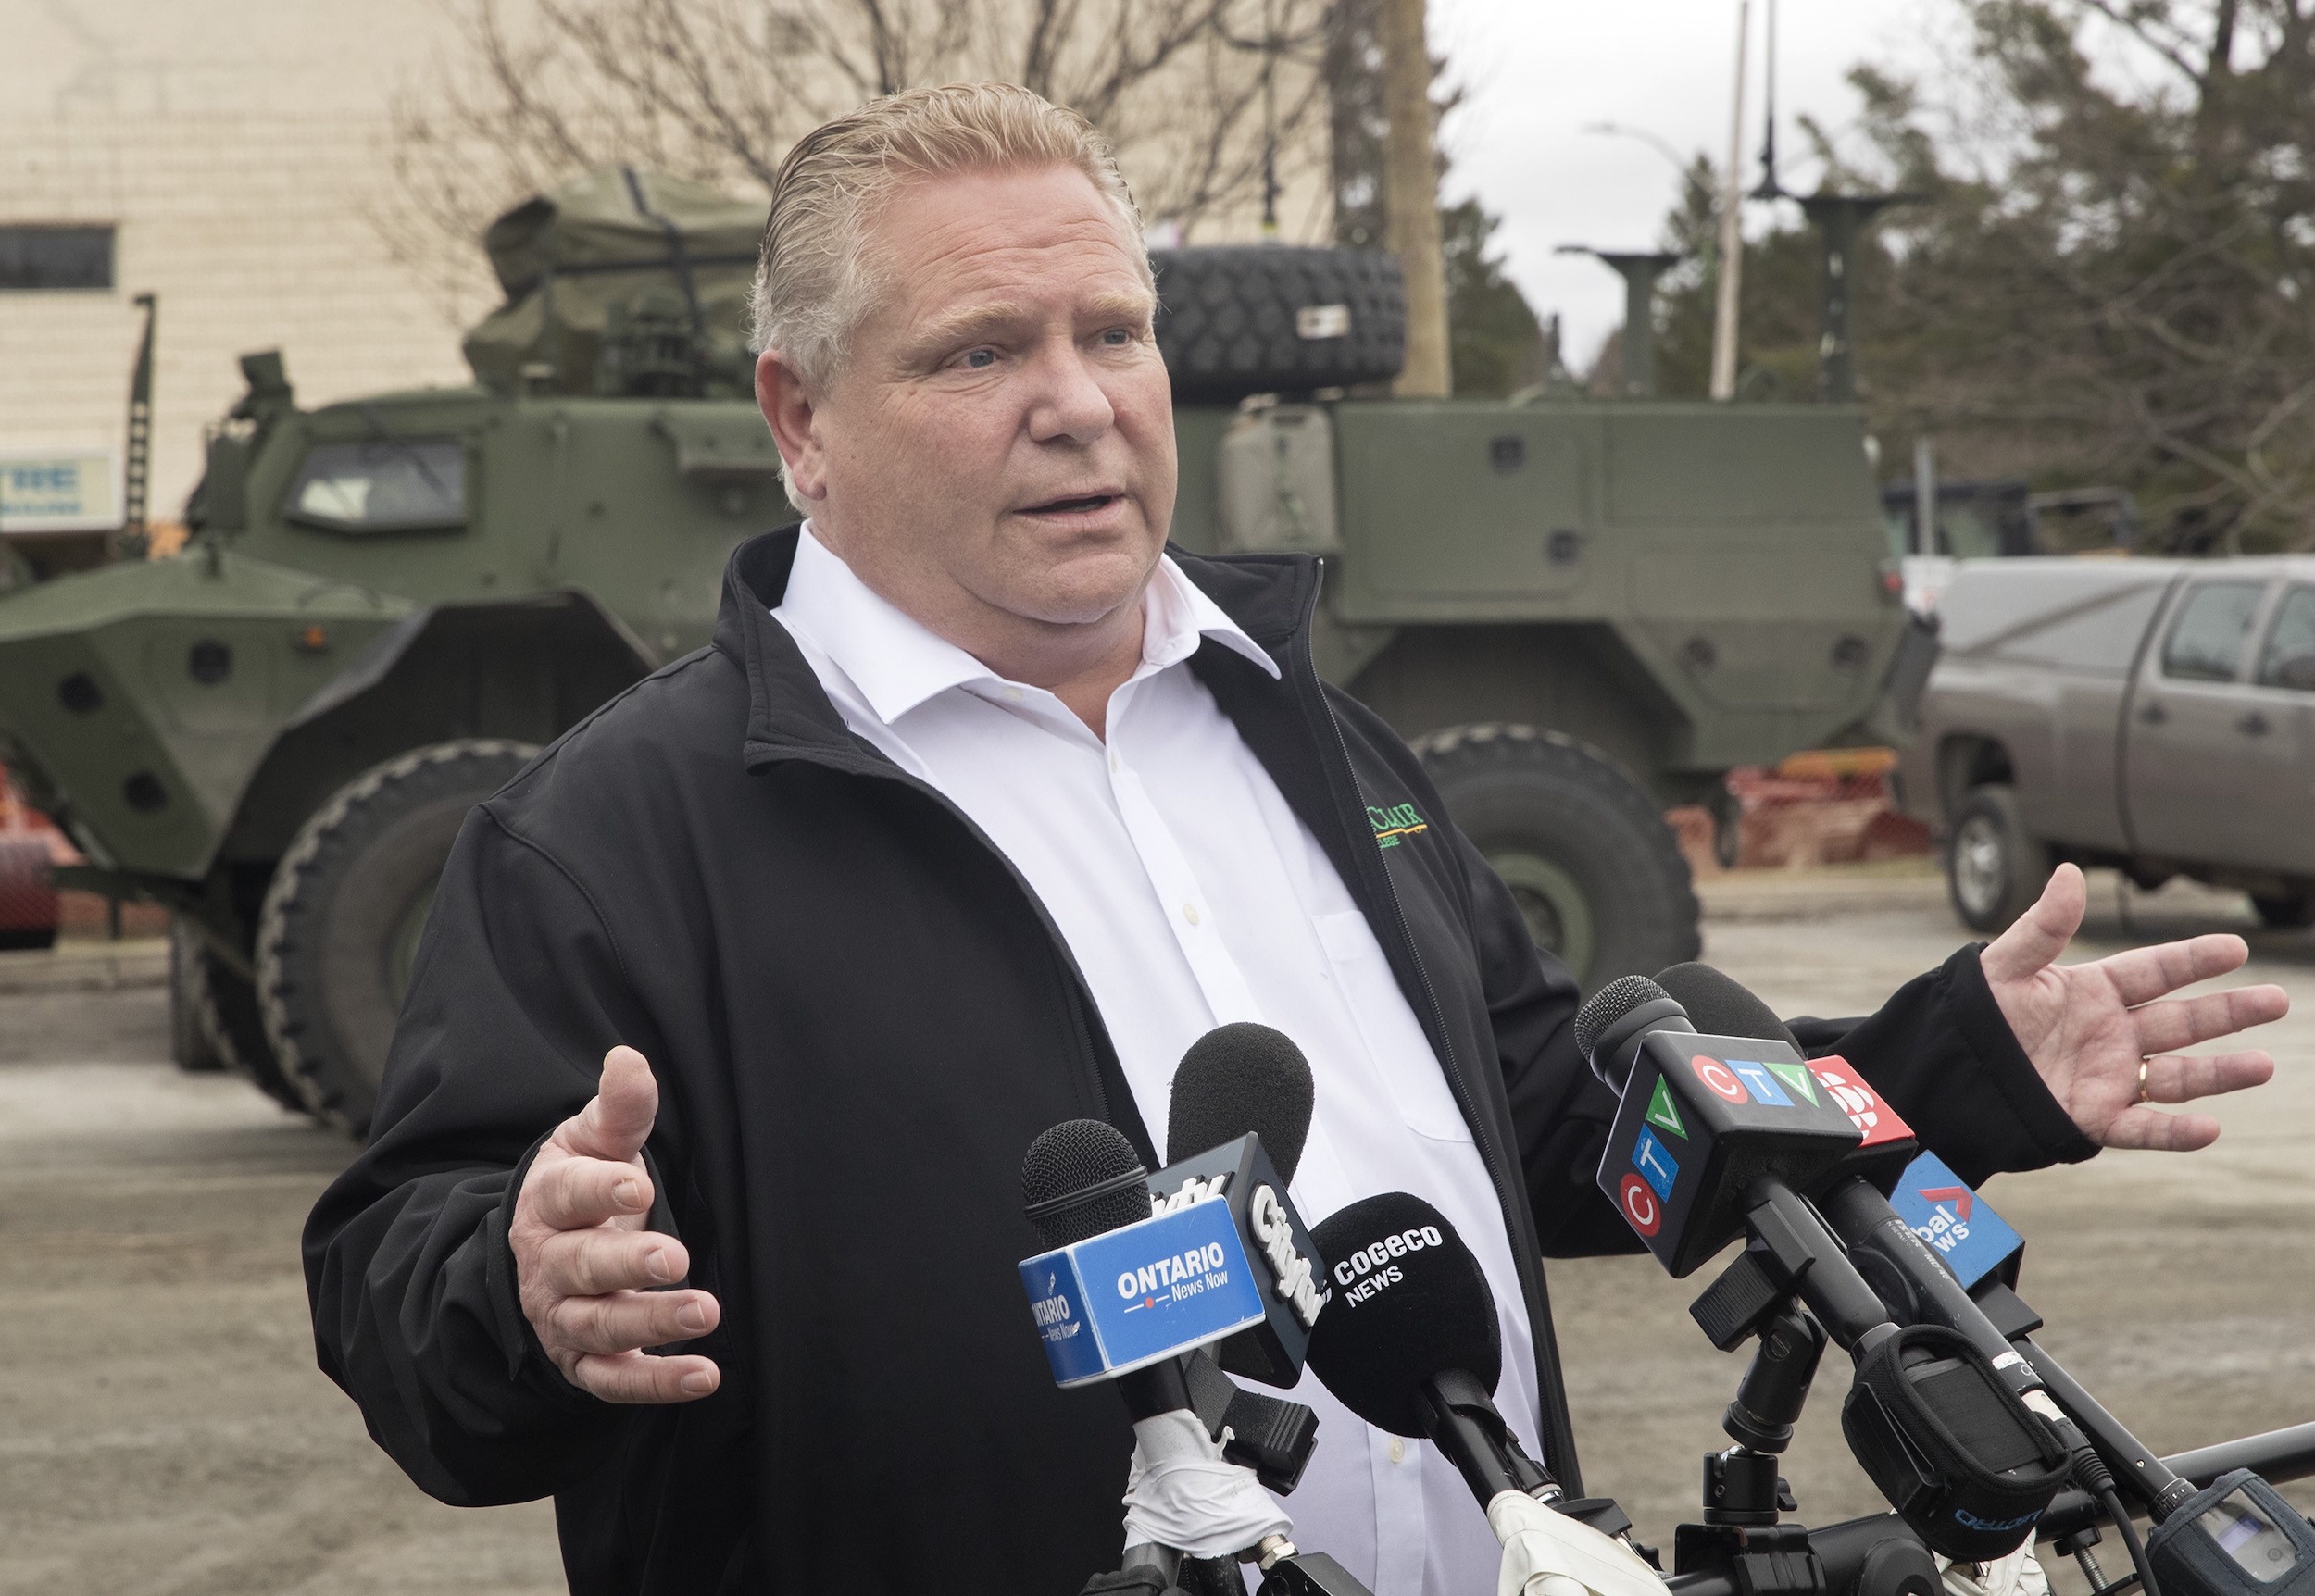 Ontario Premier Doug Ford visited Bracebridge, Ont., during severe floods in May 2019. The premier has said that his government's plan to accelerate development will not mean building on floodplains, though he also said the responsibility to ensure that lies with developers.